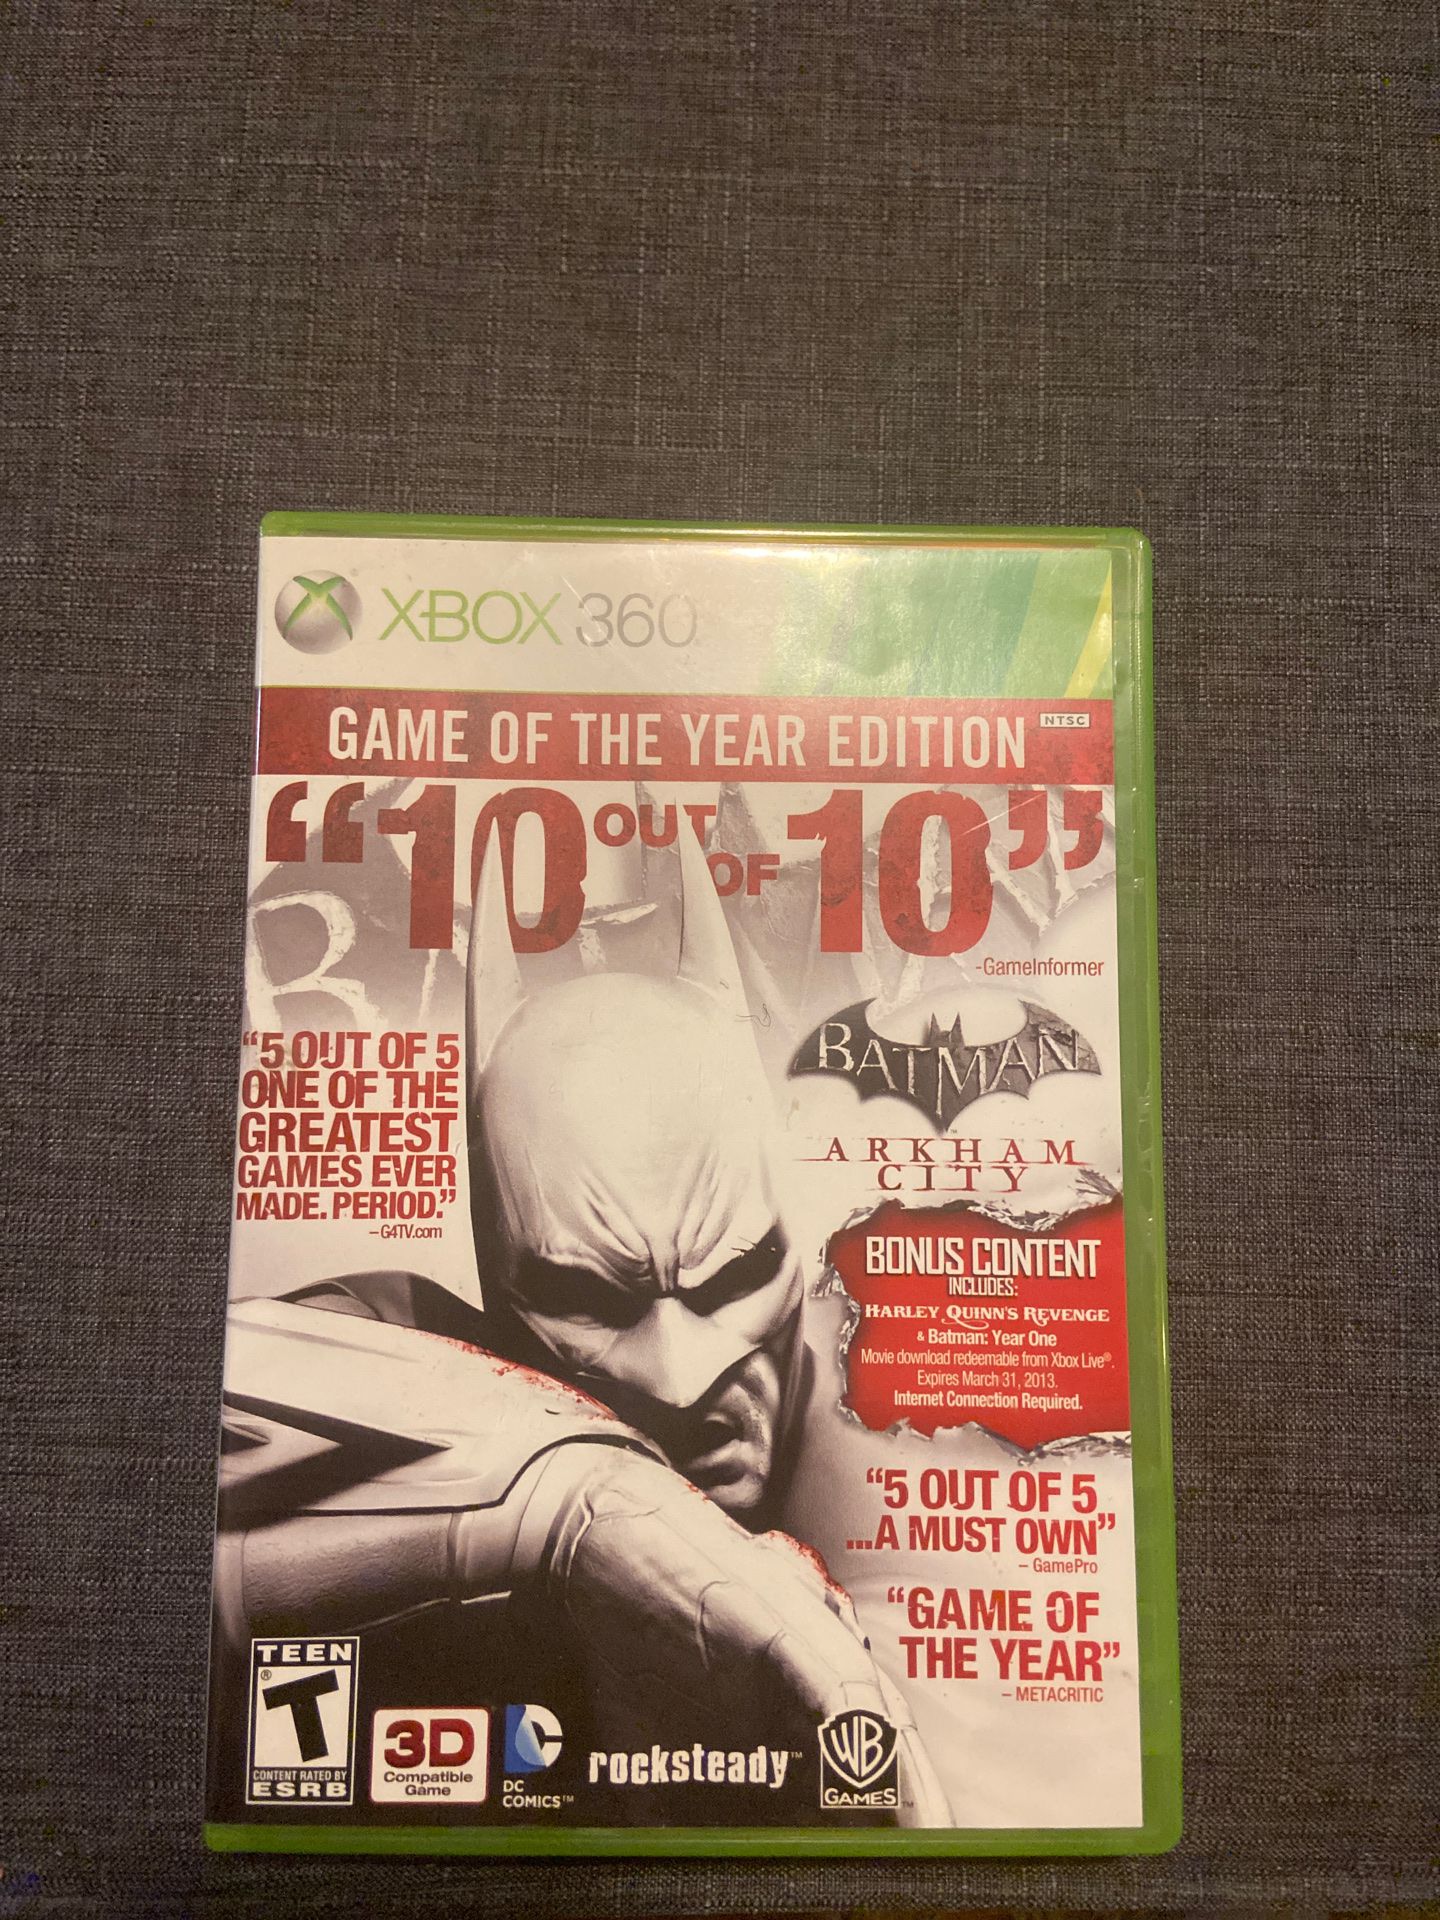 XBOX 360 GAME OF THE YEAR EDITION